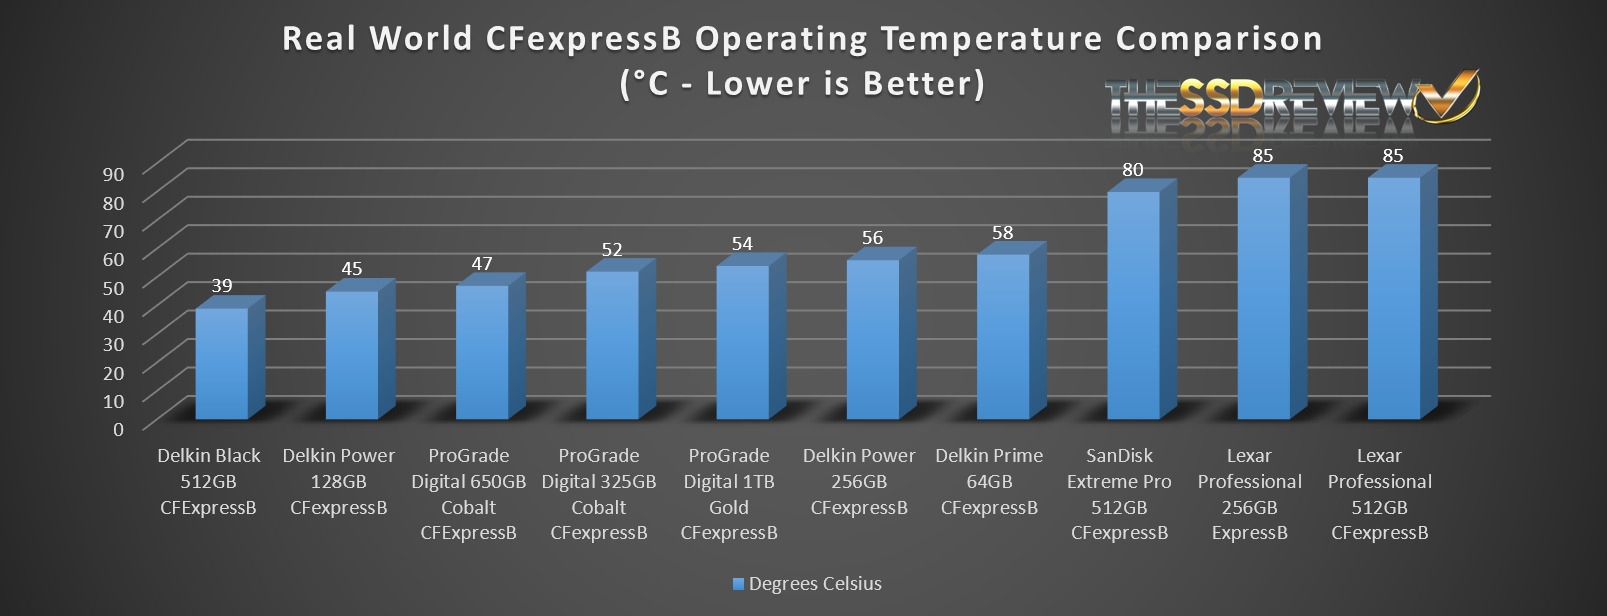 Delkin-Black-CFExpress-B-512GB-Card-Sustained-Low-Temperature.jpg